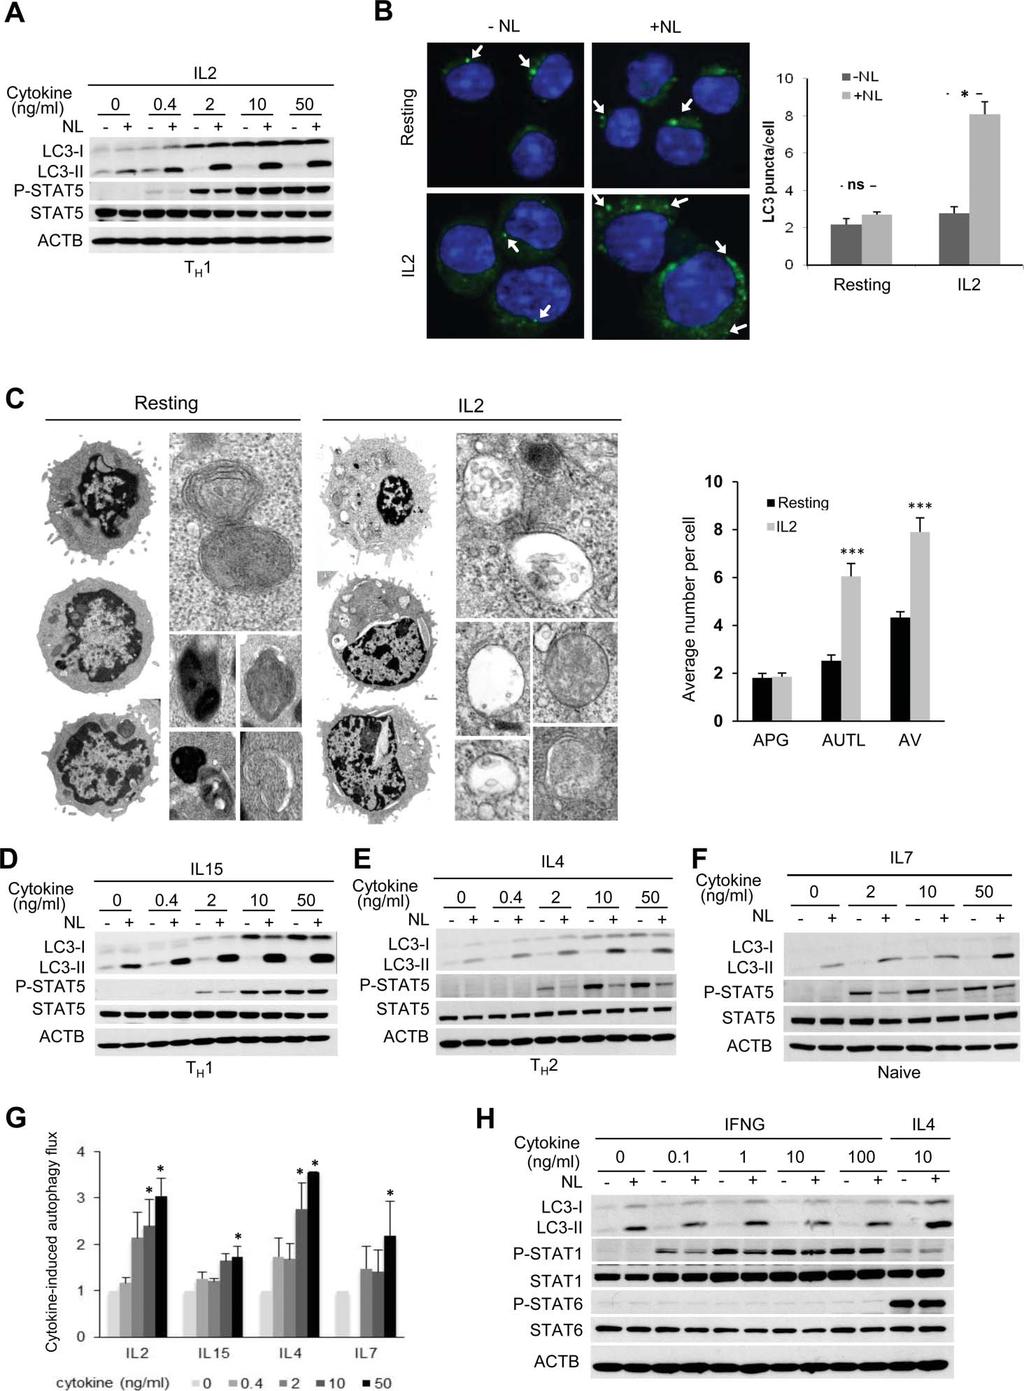 numbers of autophagic vacuoles were significantly increased in IL2-treated cells compared to resting cells (Fig. 3C and S2).